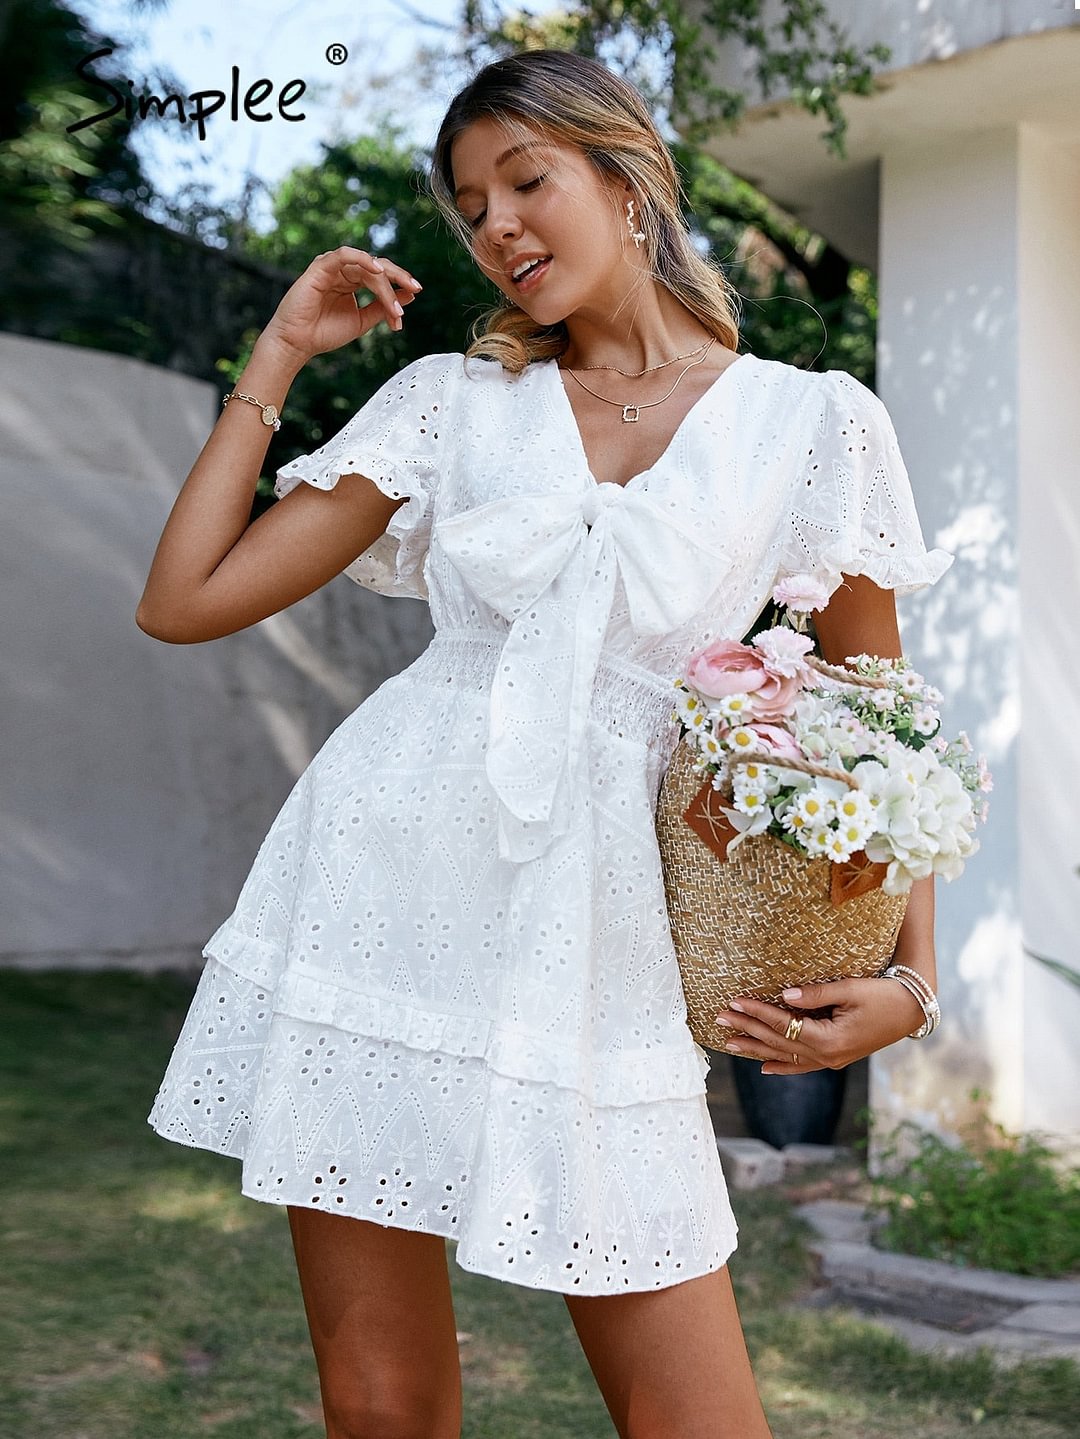 Simplee Cotton hollow out puff short sleeve women summer dress Holiday white bow beach mini sundress  A-line 2022 mujer vestidos